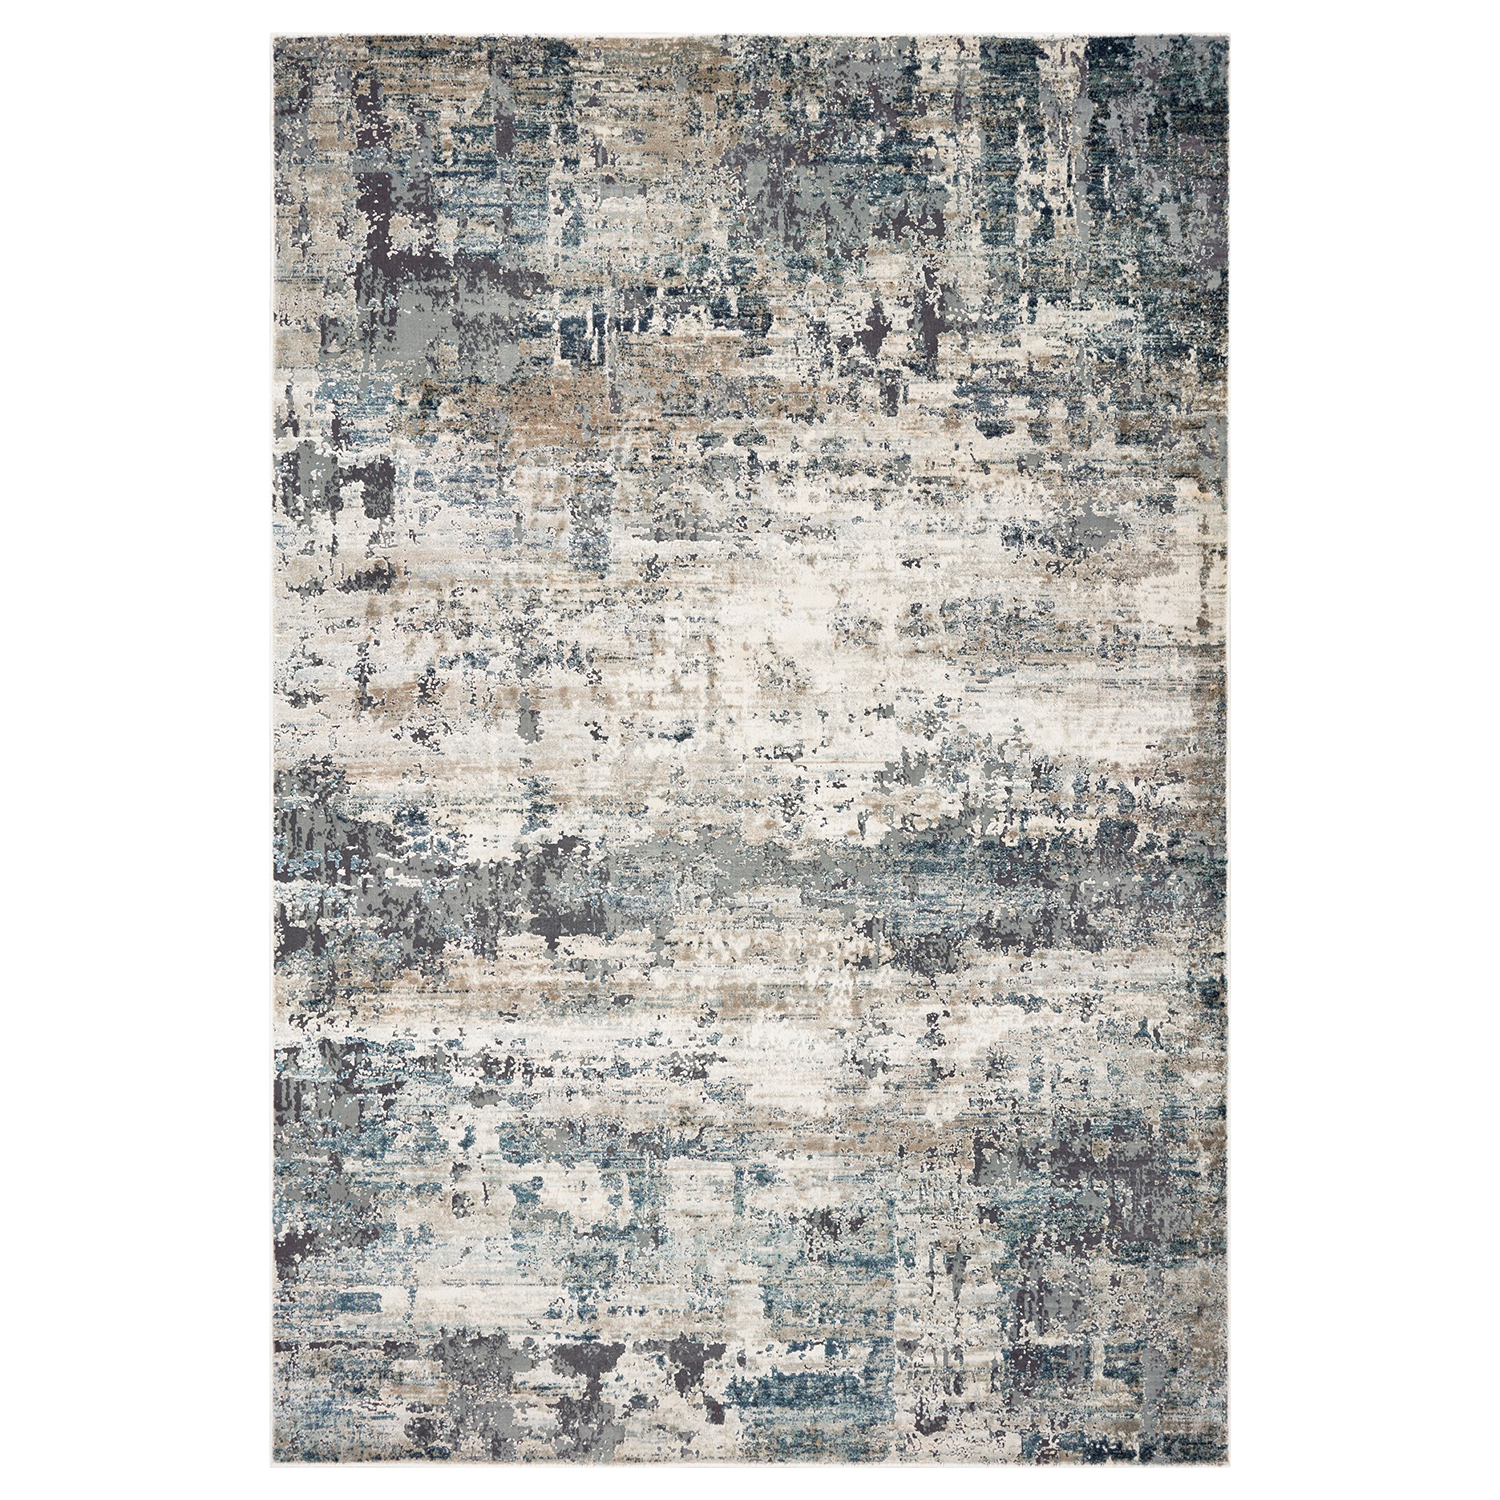 8 x 13 Ivory and Multi Gray Area Rug